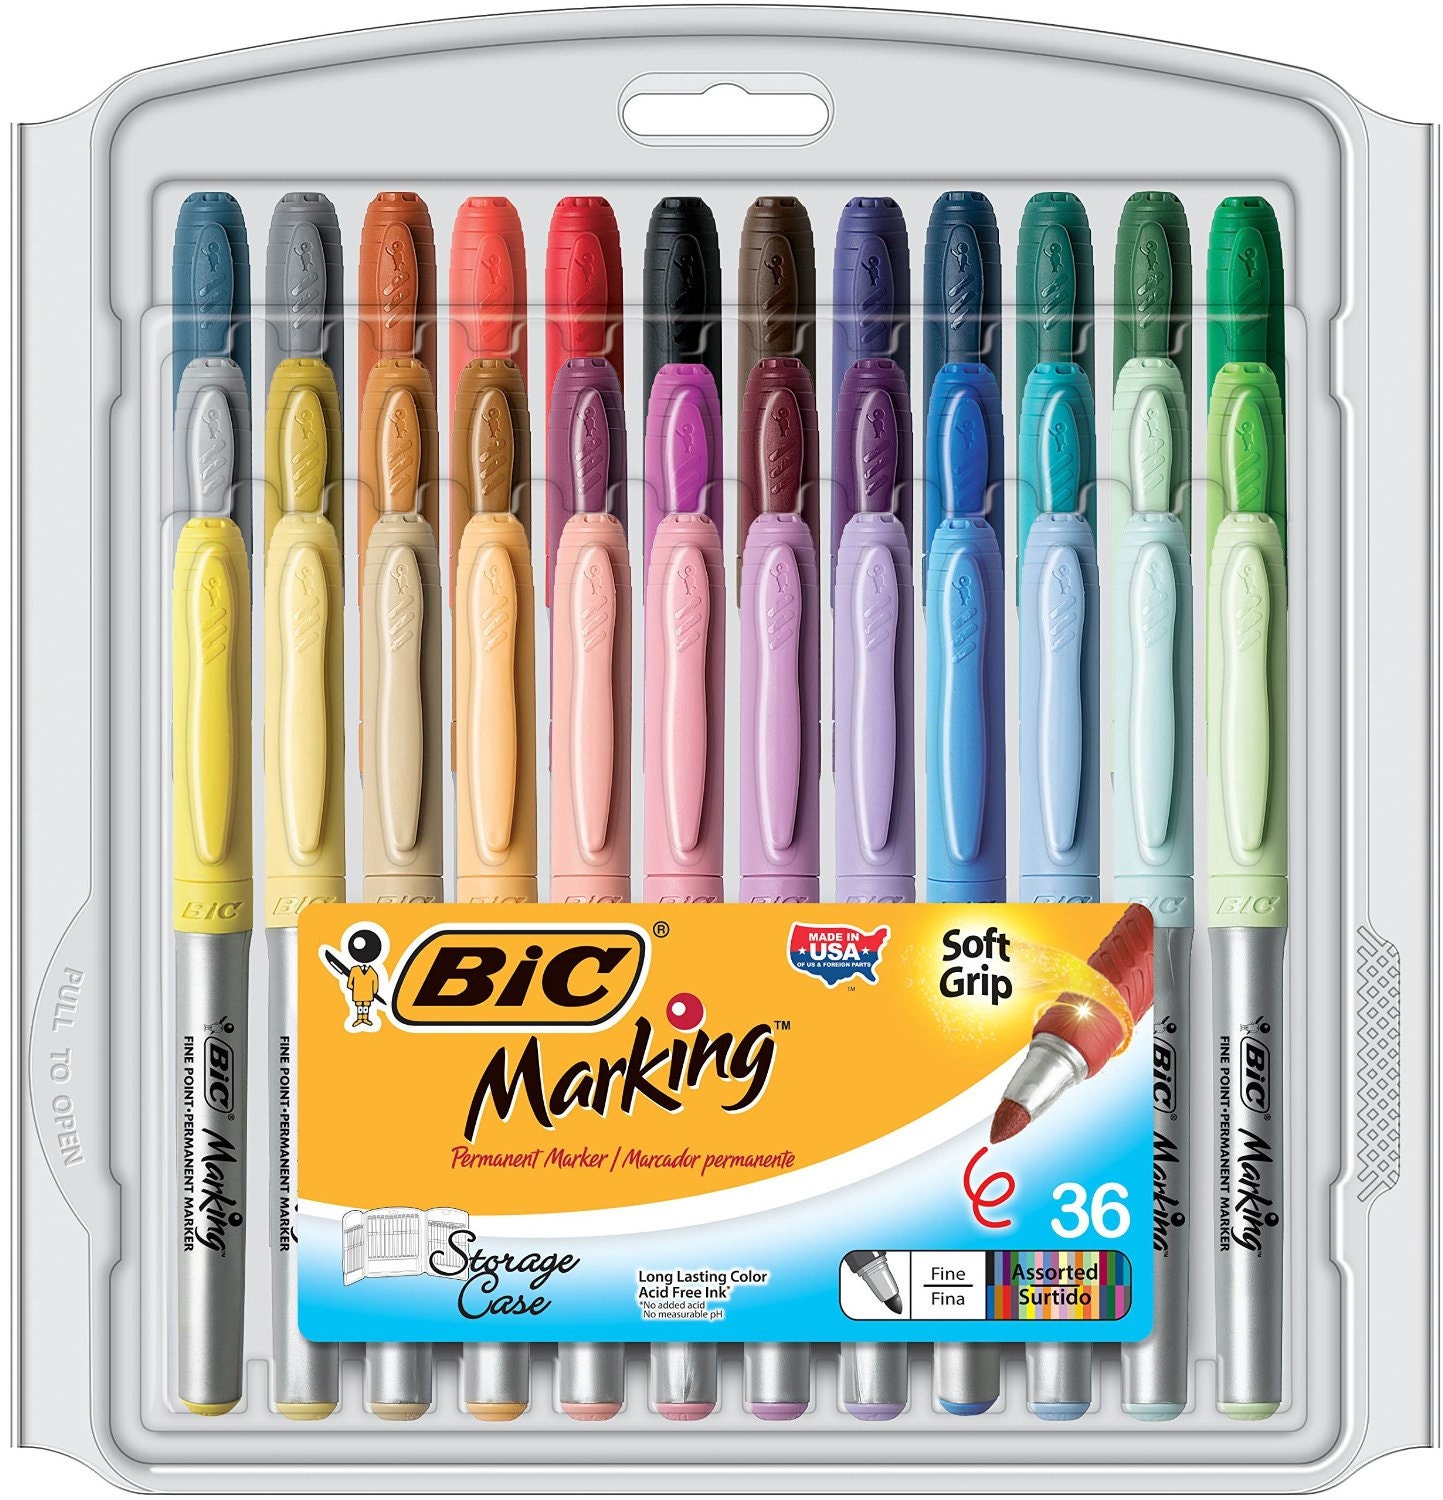 BIC Marking Textile Ultra Fine Permanent Markers - Black, Pack of 2 BIC